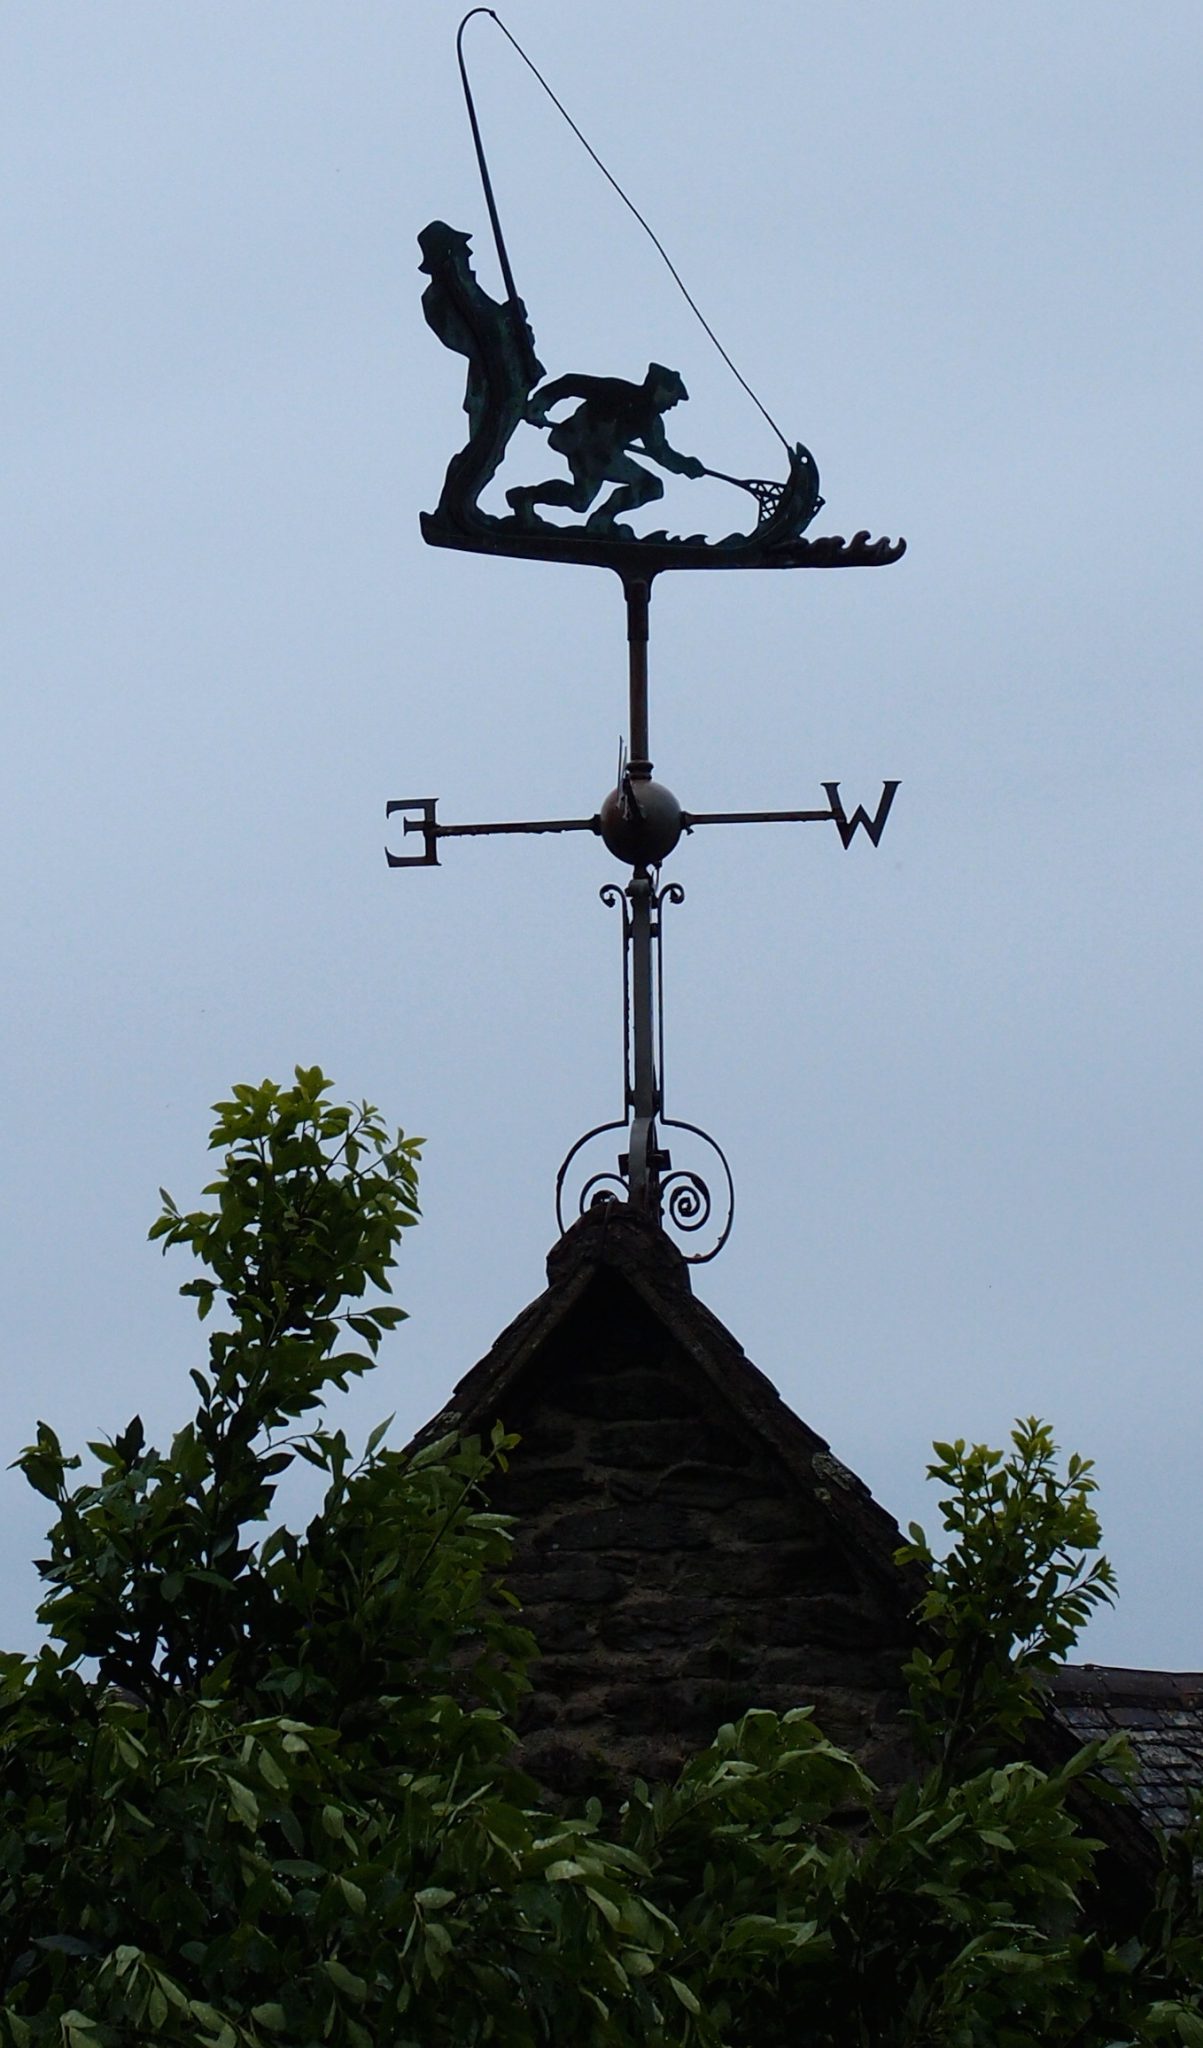 Above the Loggia's roof: a weather vane, which celebrated Rupert's love of fishing.